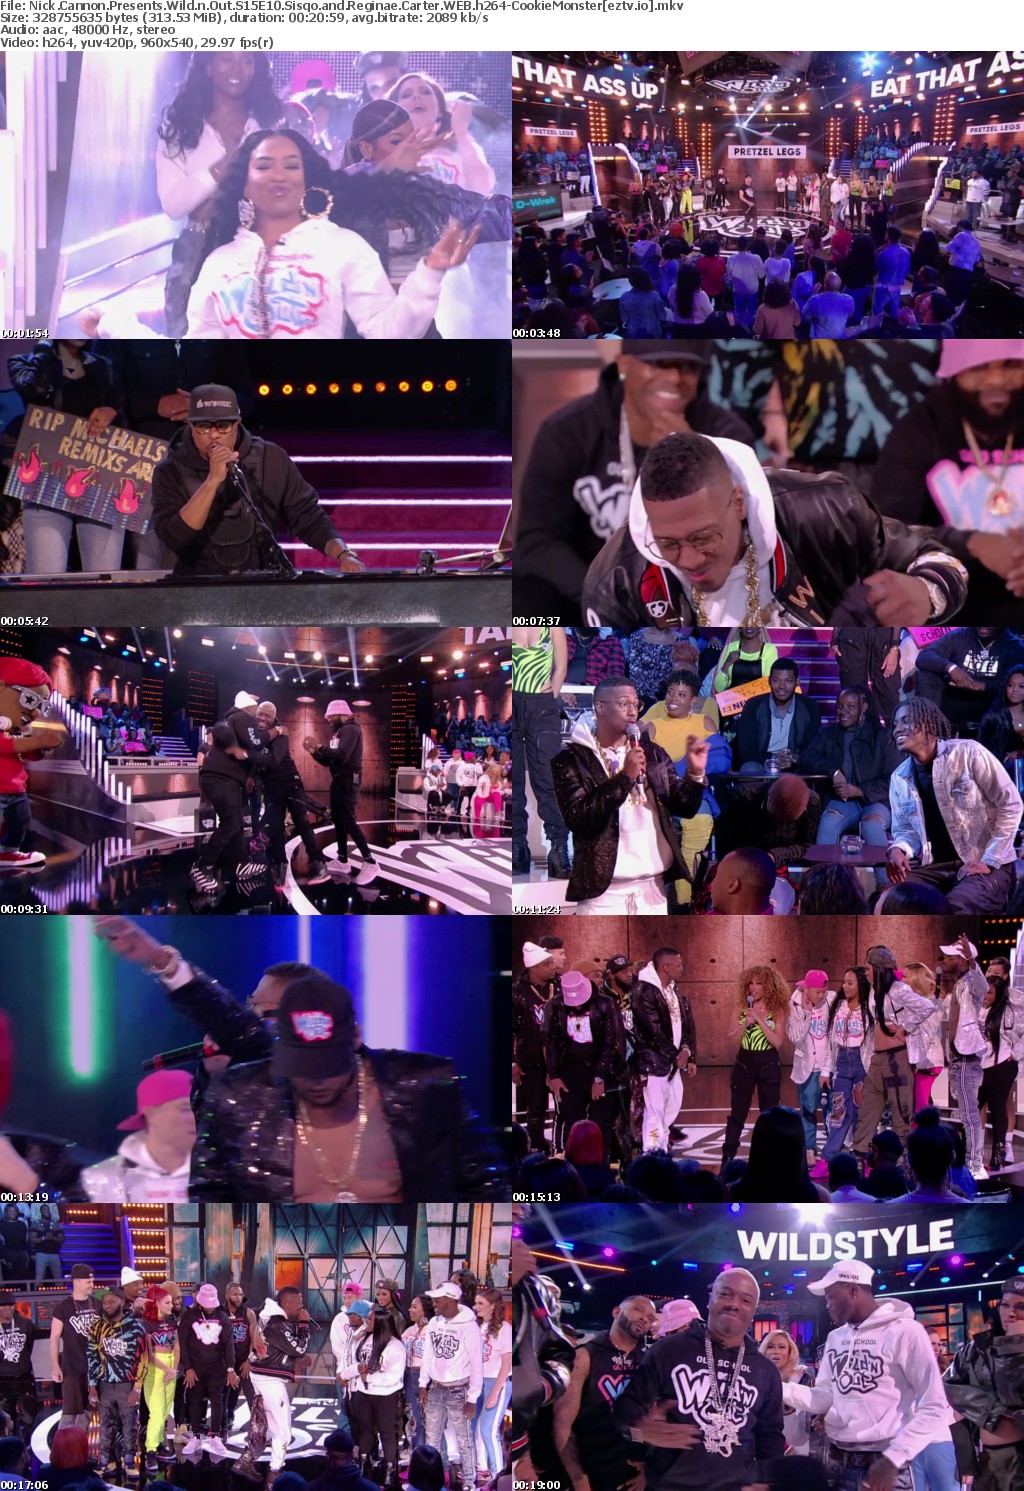 Nick Cannon Presents Wild n Out S15E10 Sisqo and Reginae Carter WEB h264-CookieMonster